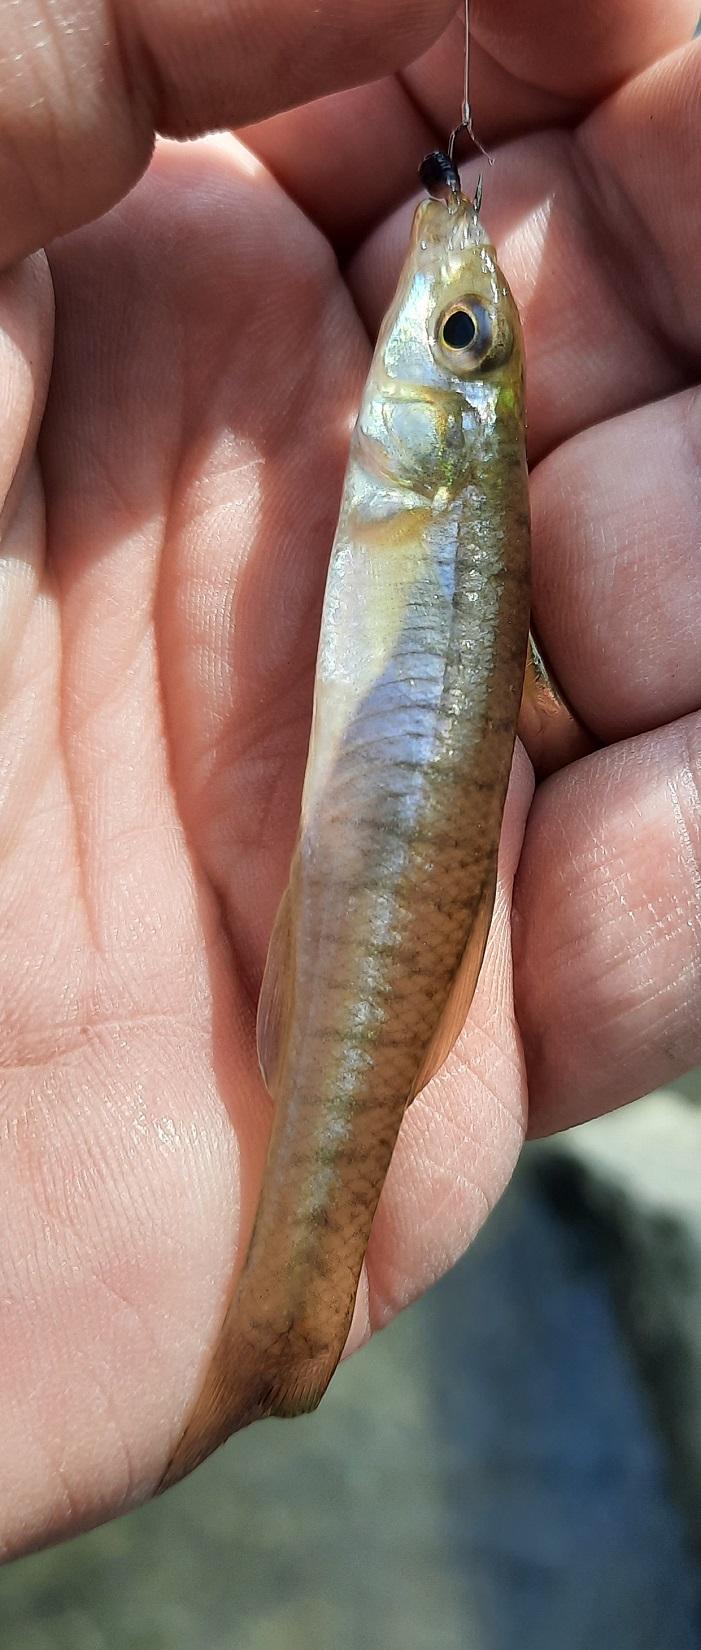 Shad Success - Finally! - General Angling Discussion - OzarkAnglers.Com  Forum